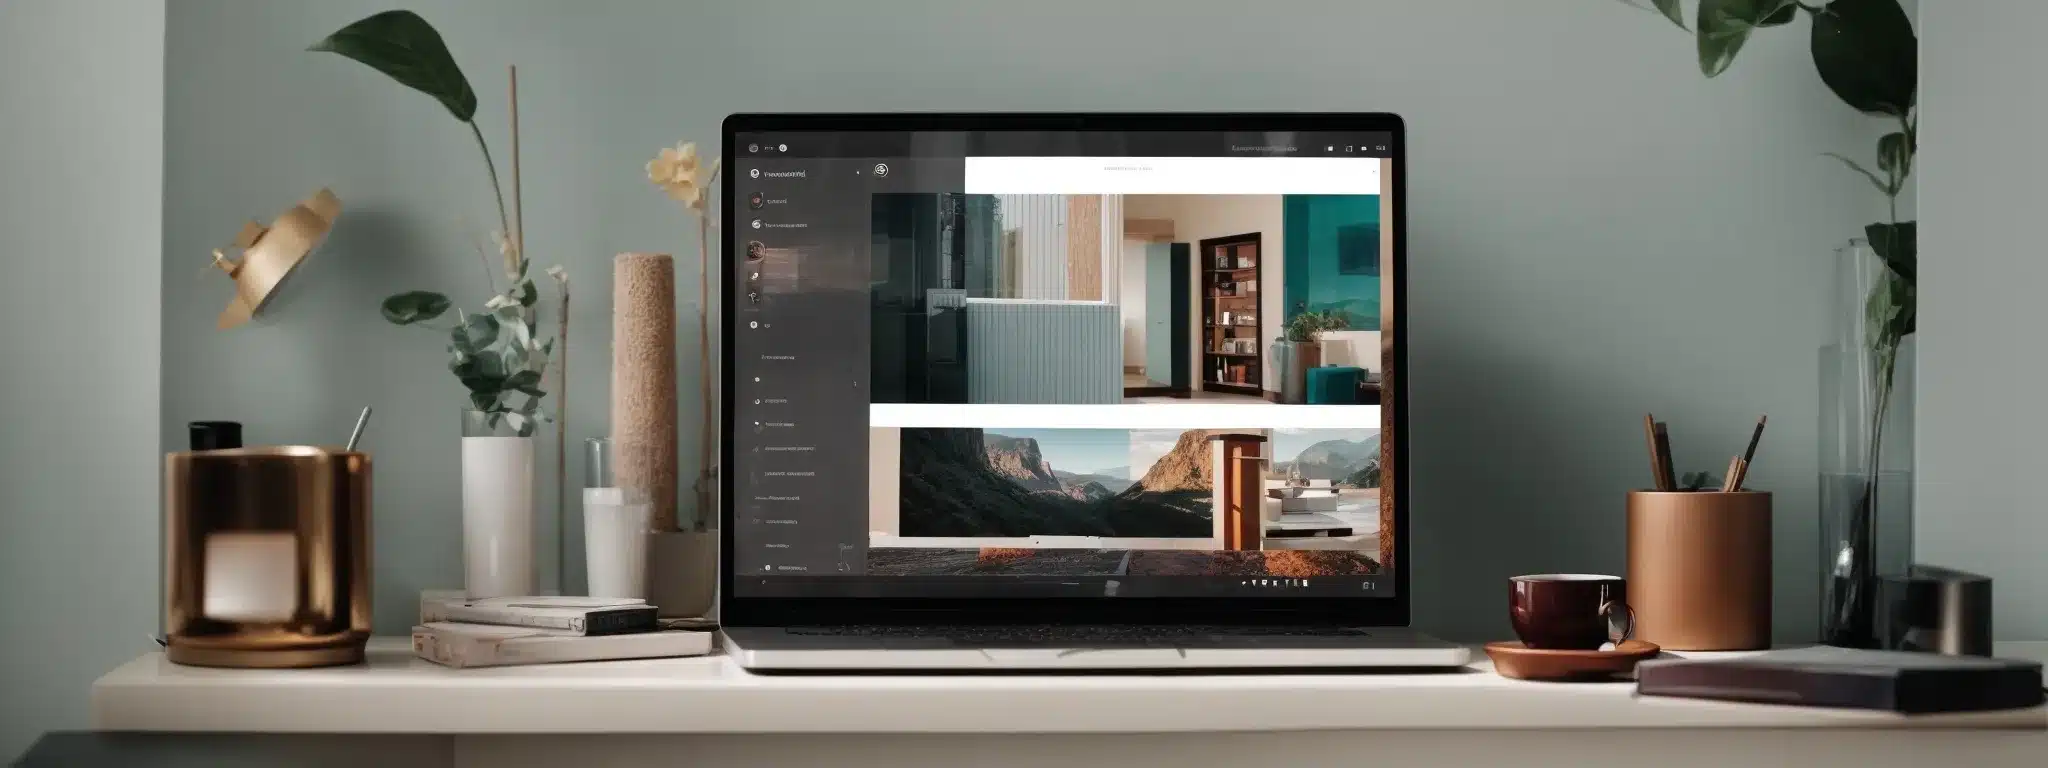 A Laptop Displays A Vibrant Gallery Of Multimedia Elements Transitioning Smoothly On Its Screen Amidst A Minimalist Setup.